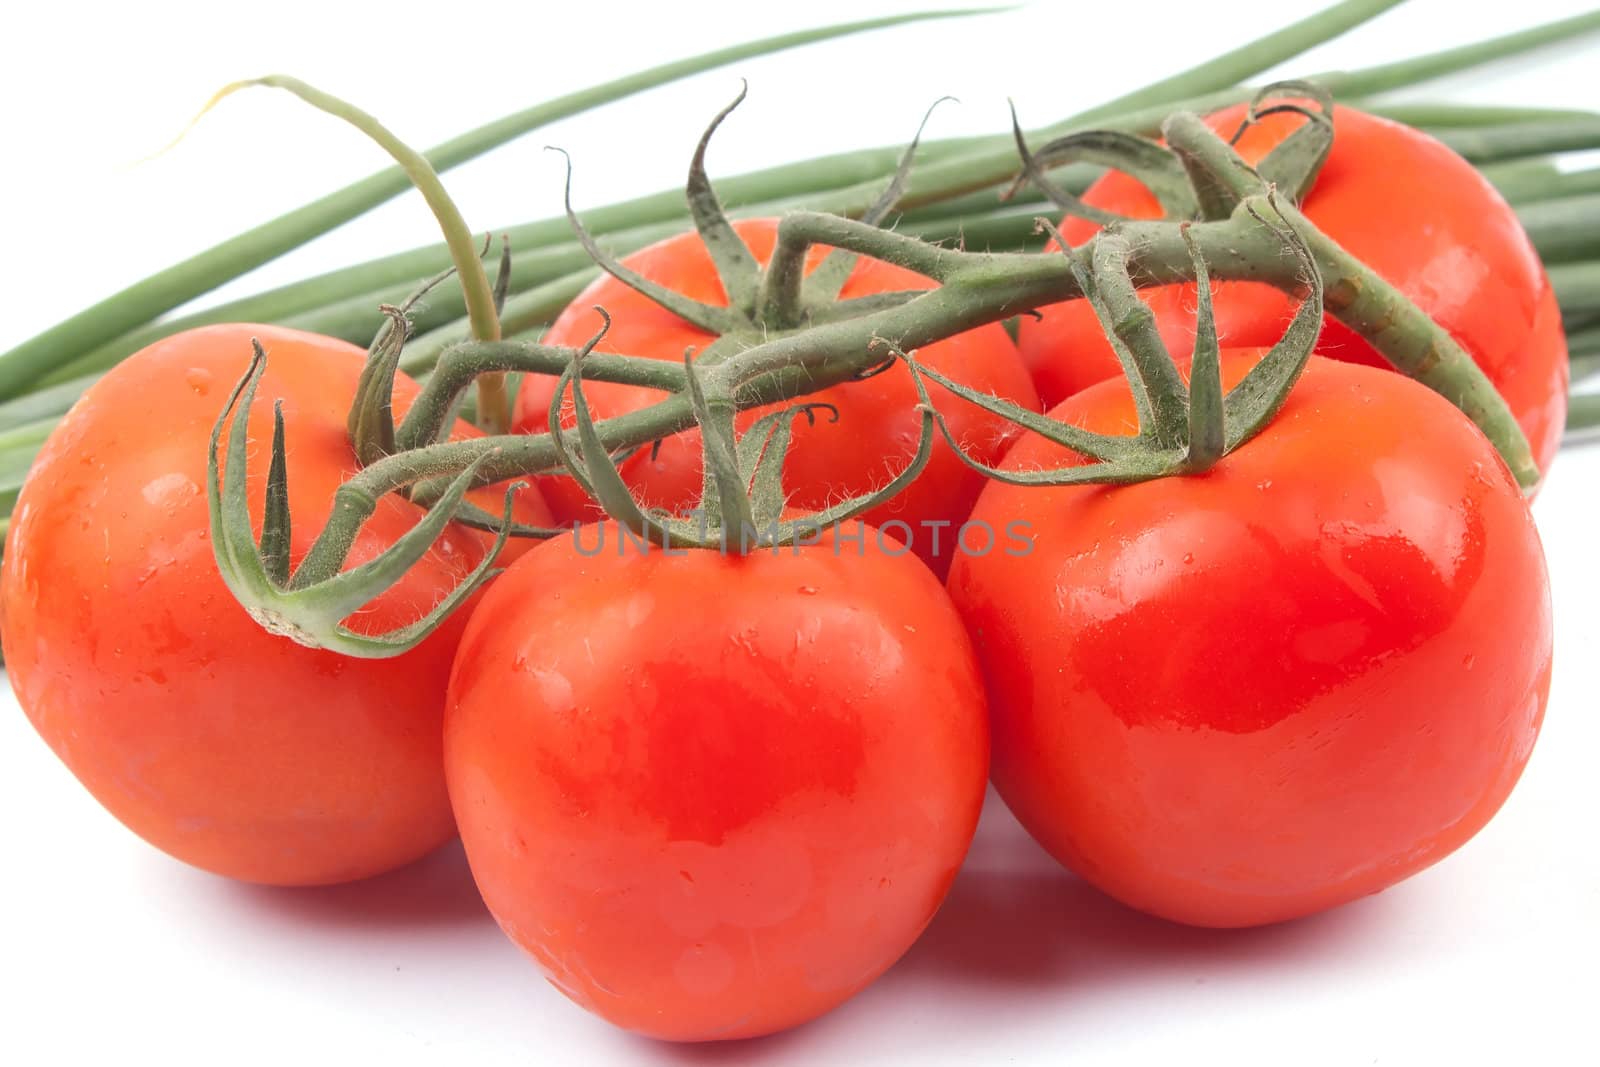 Red tomatoes on a branch by victosha